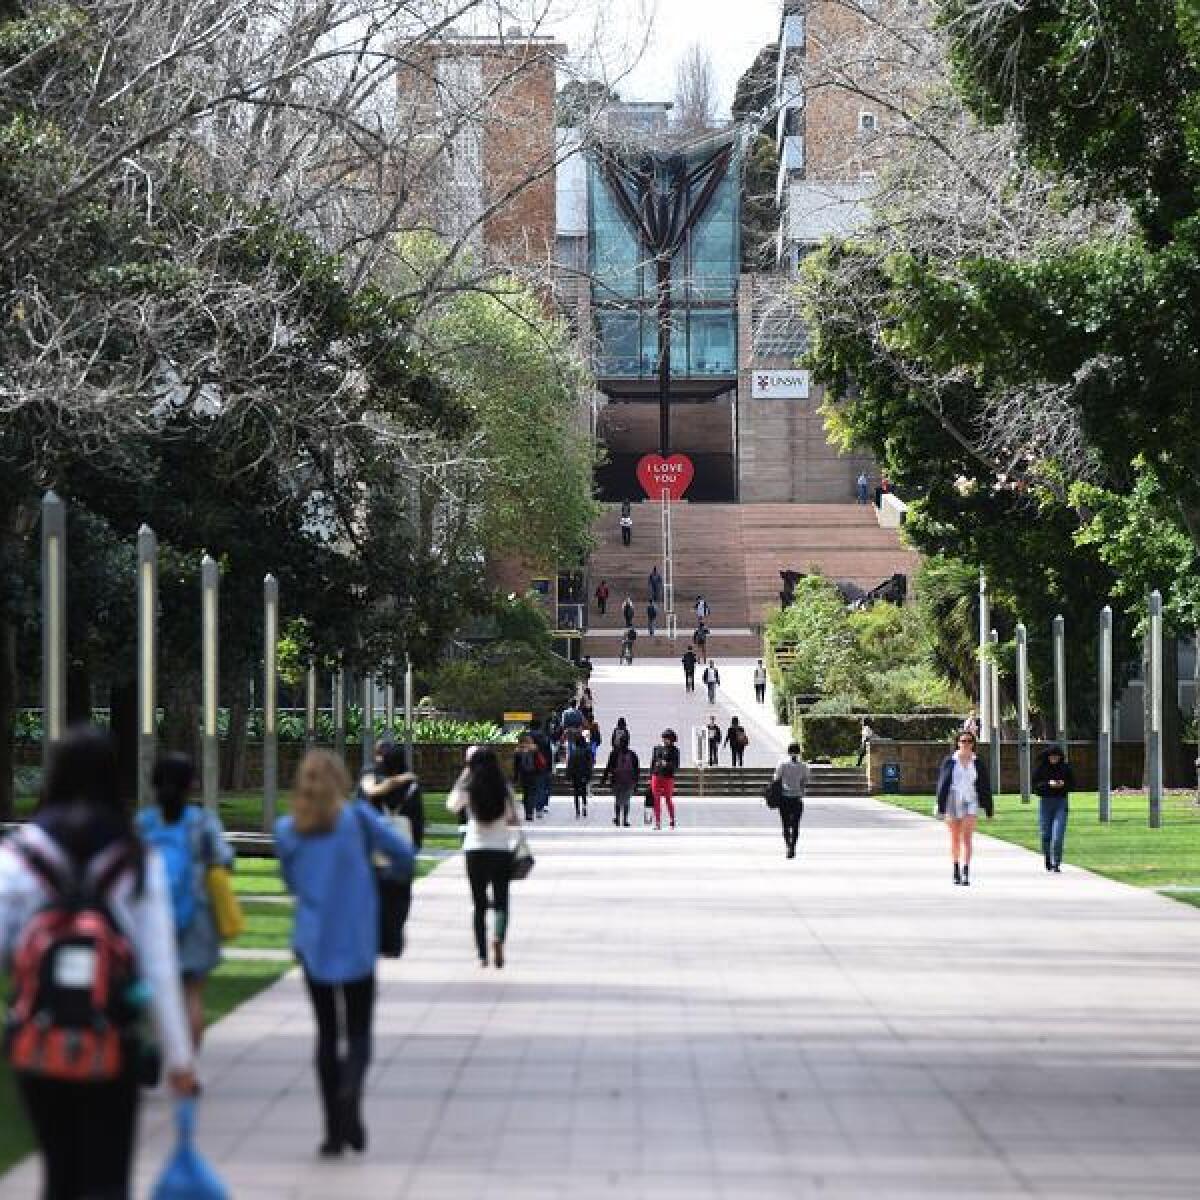 Students enter the University of New South Wales (UNSW) in Sydney